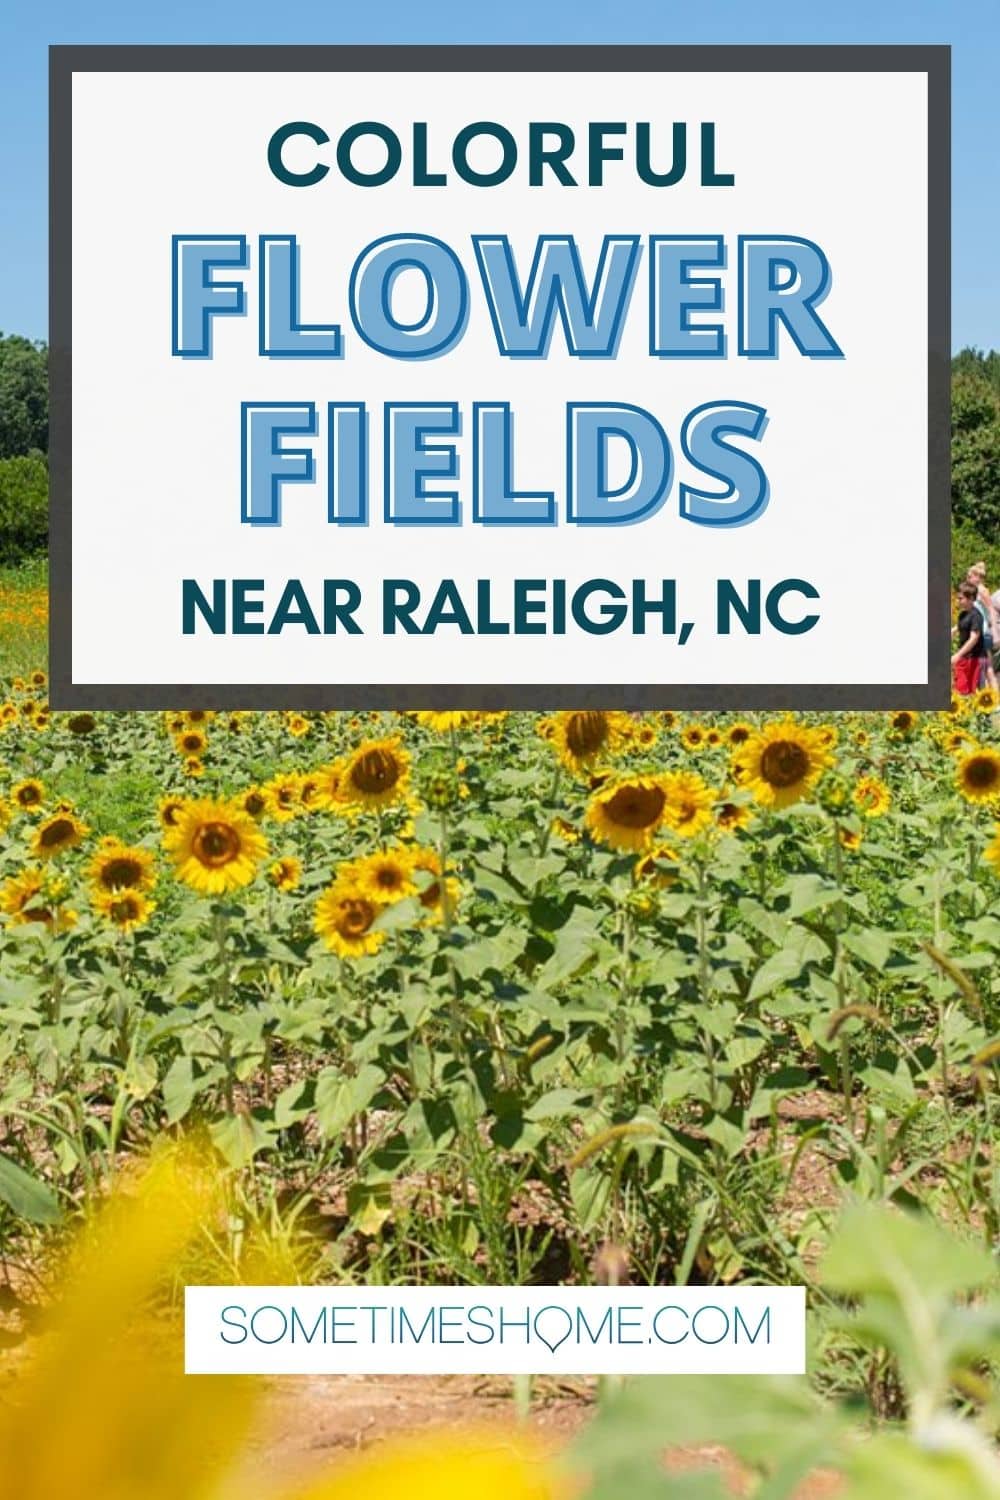 Colorful flower fields near Raleigh, NC with an image of a sunflower field behind it.